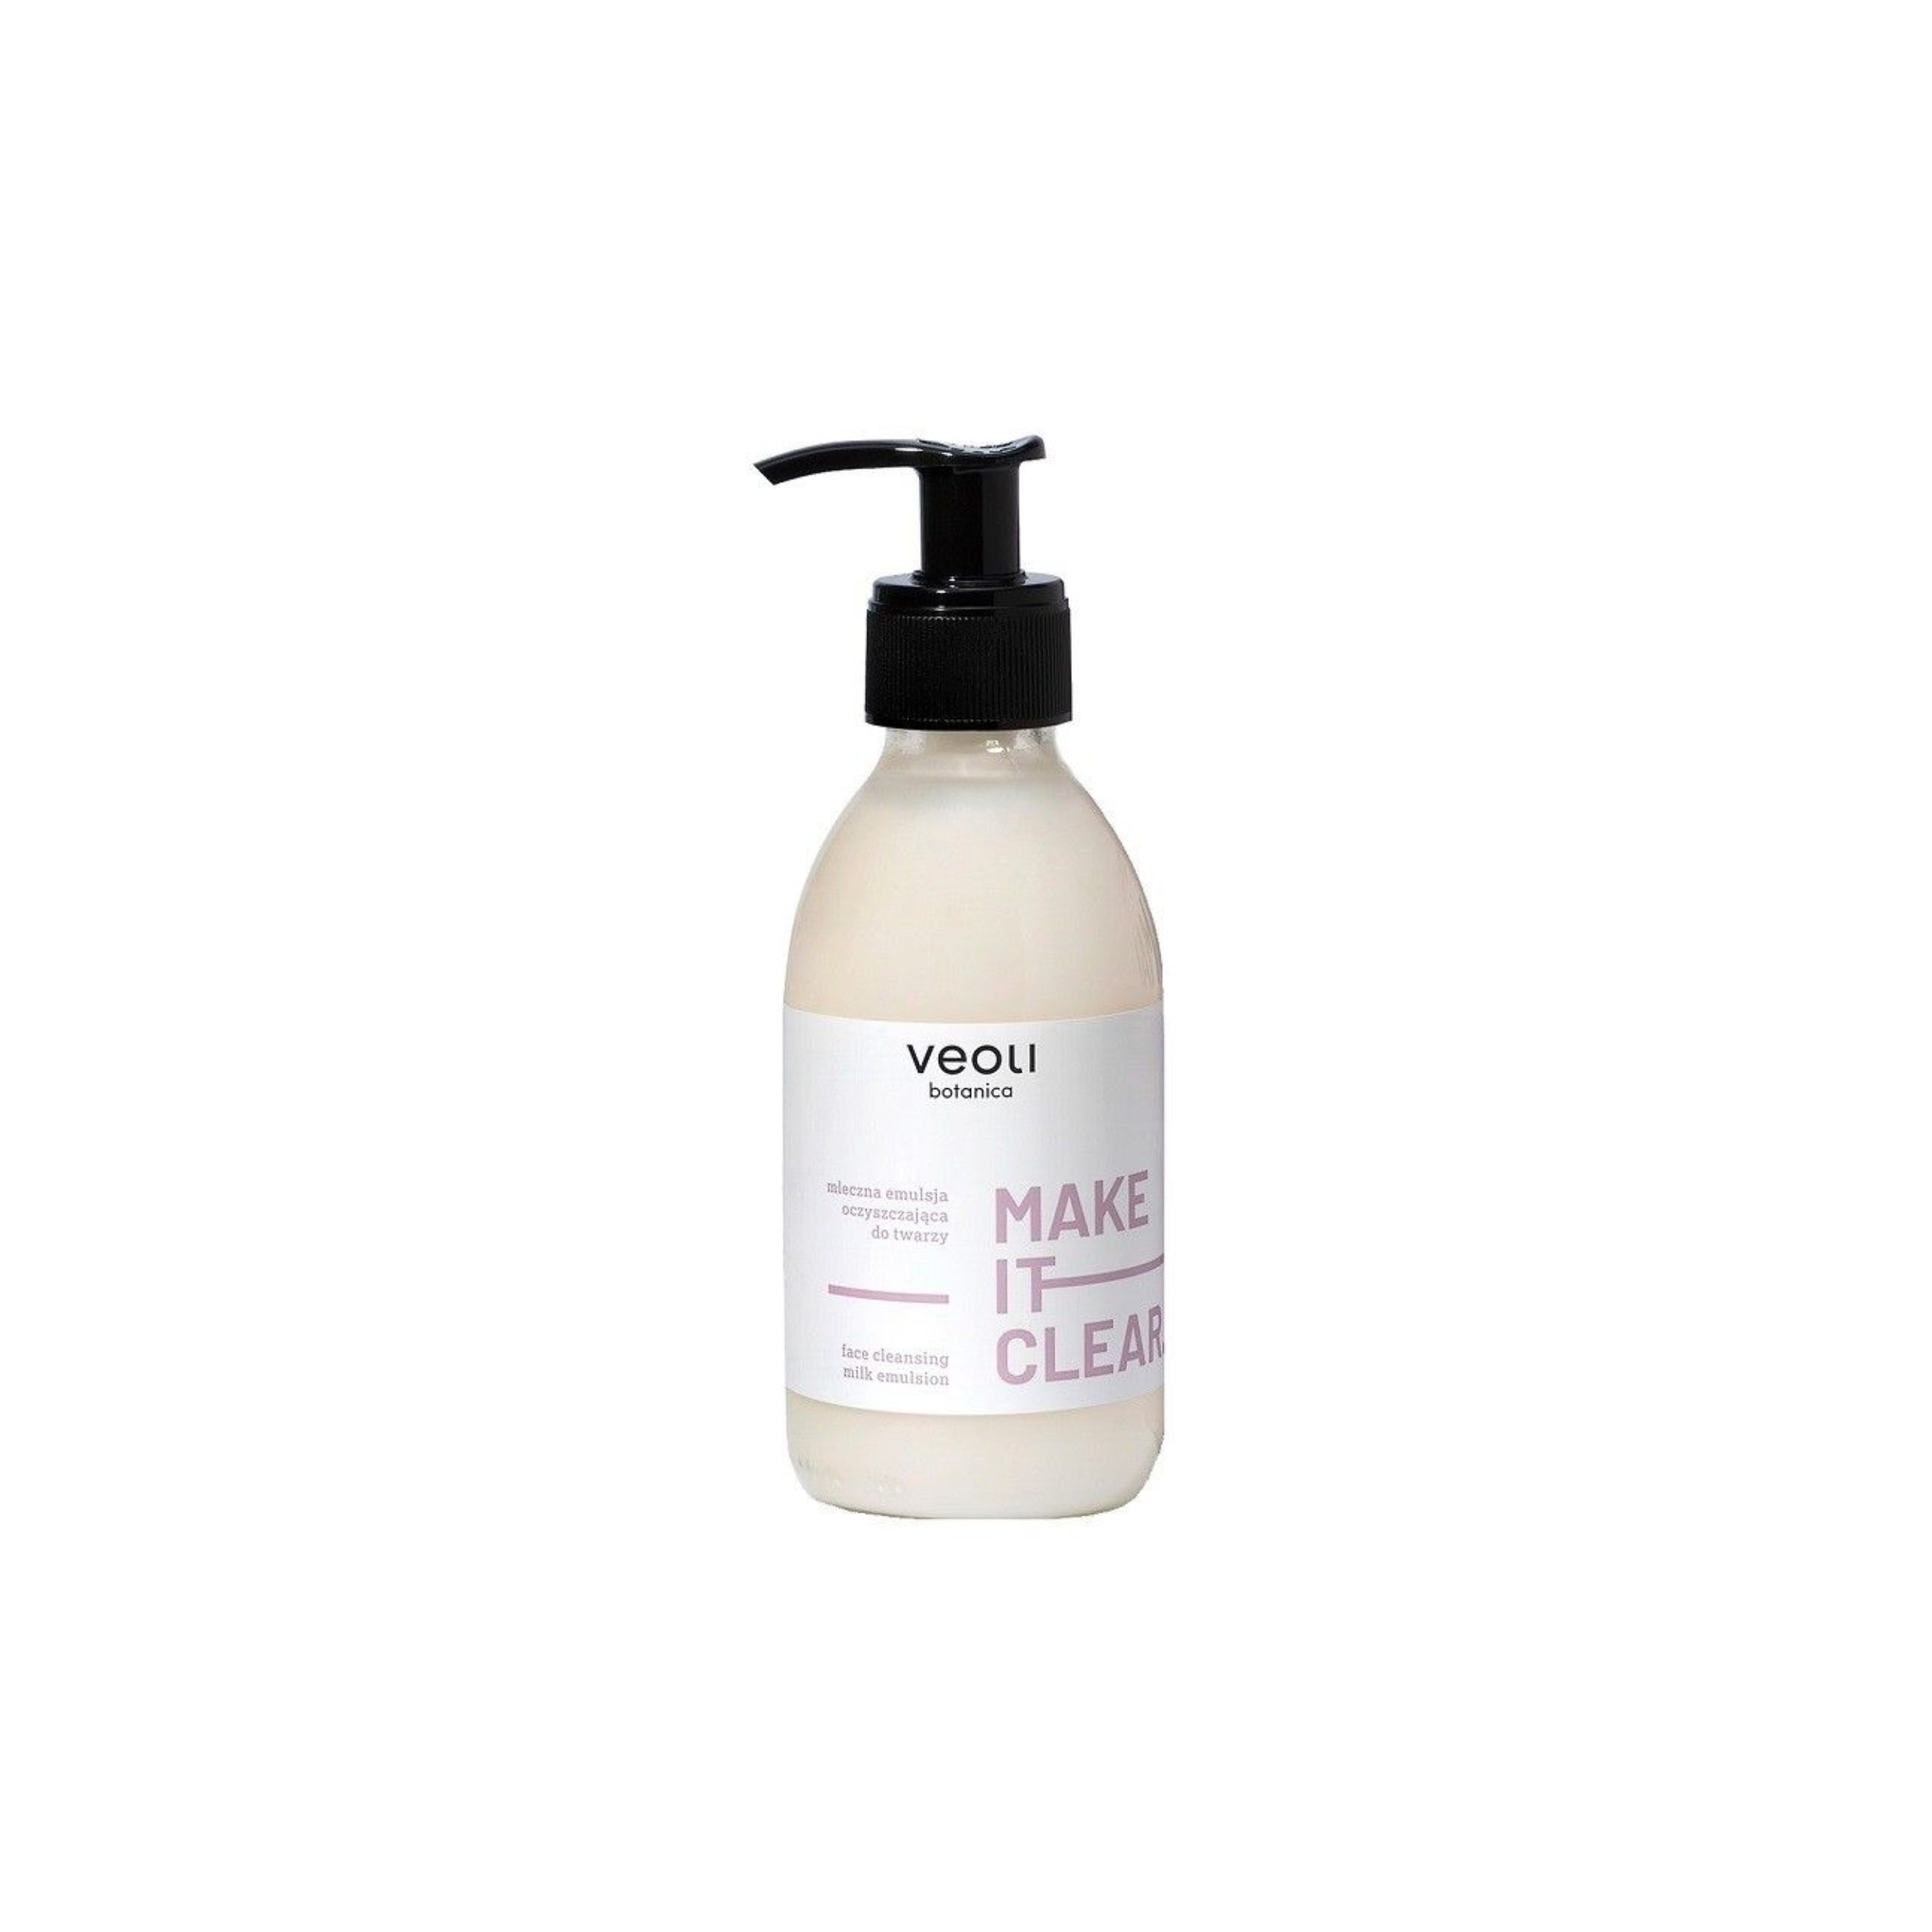 Make It Clear Face Cleansing Milk Emulsion